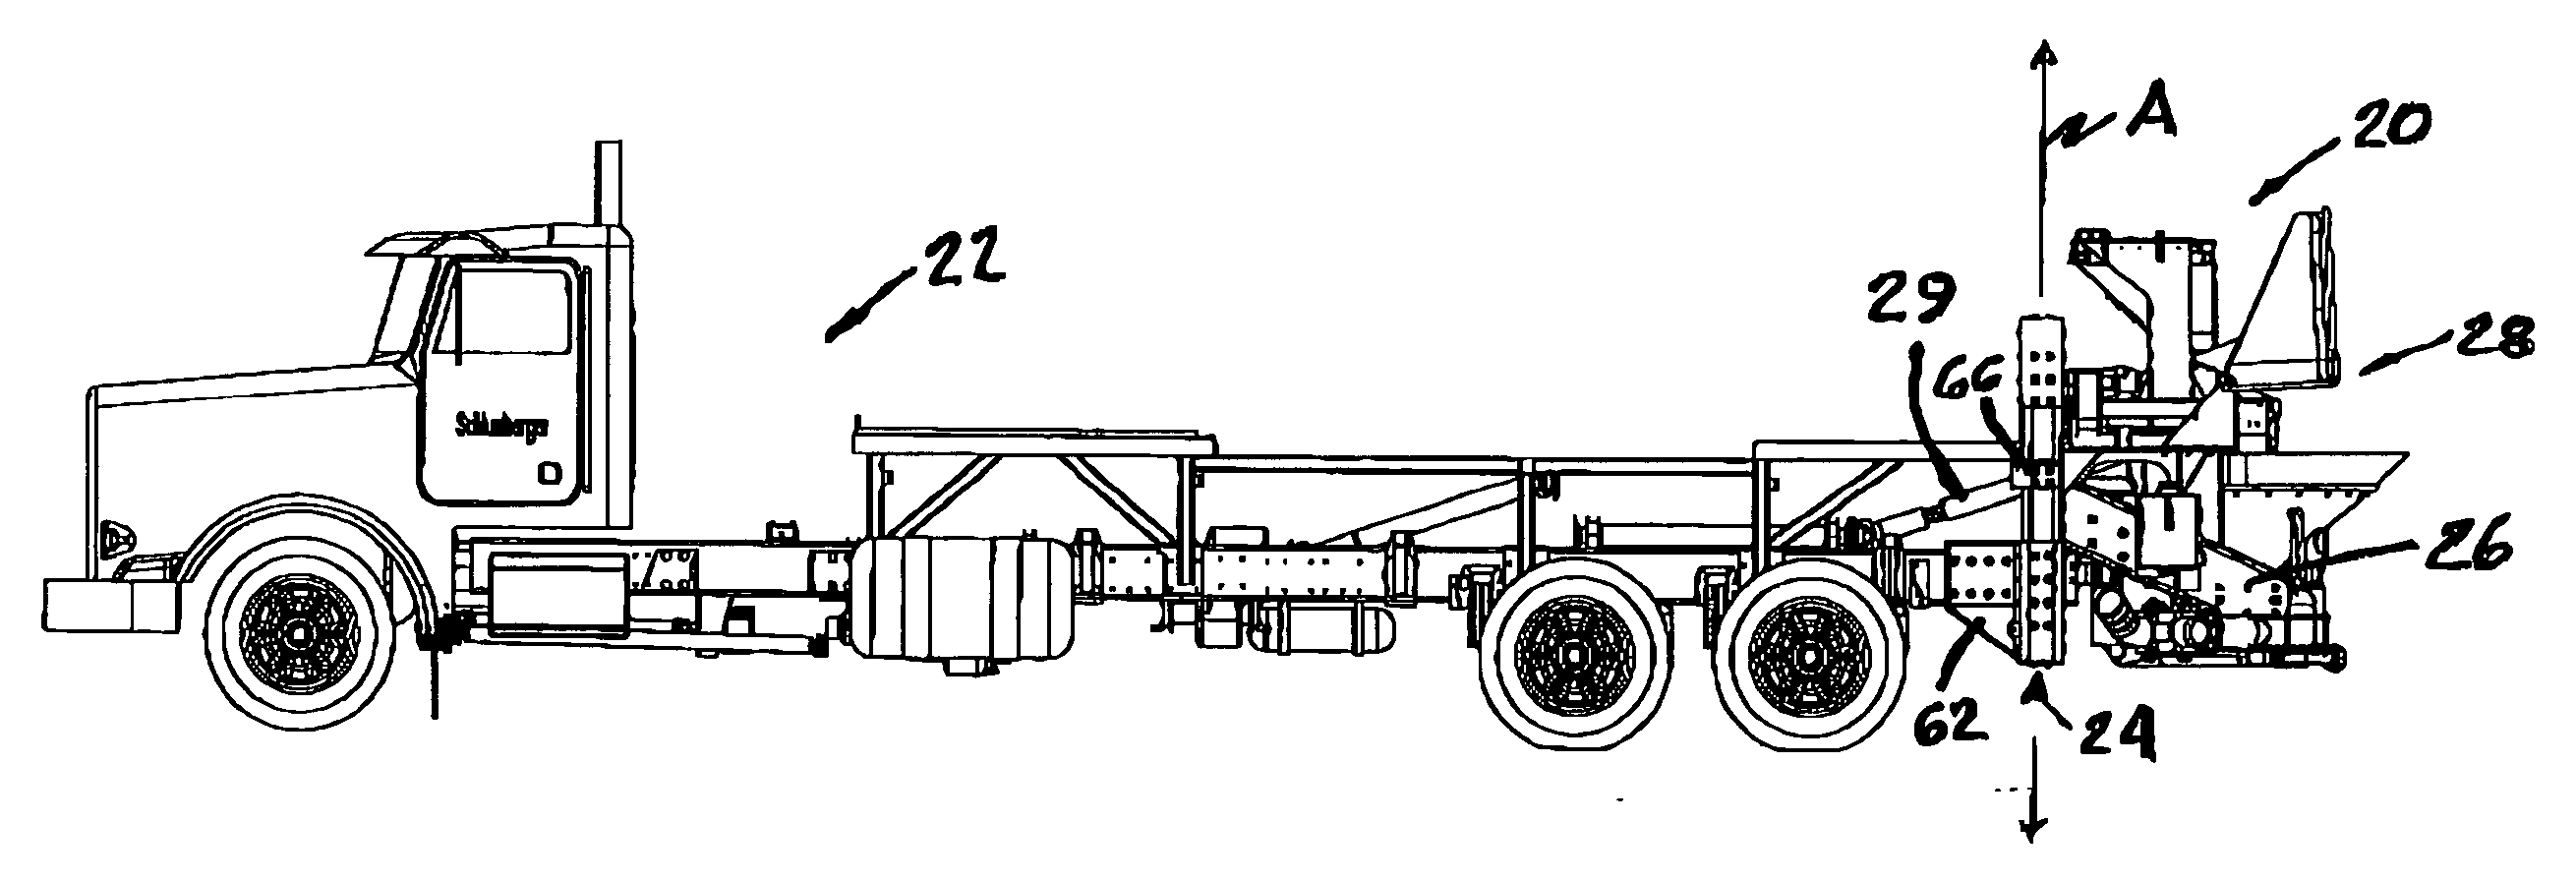 Apparatus for mounting a frac blender on a transport vehicle